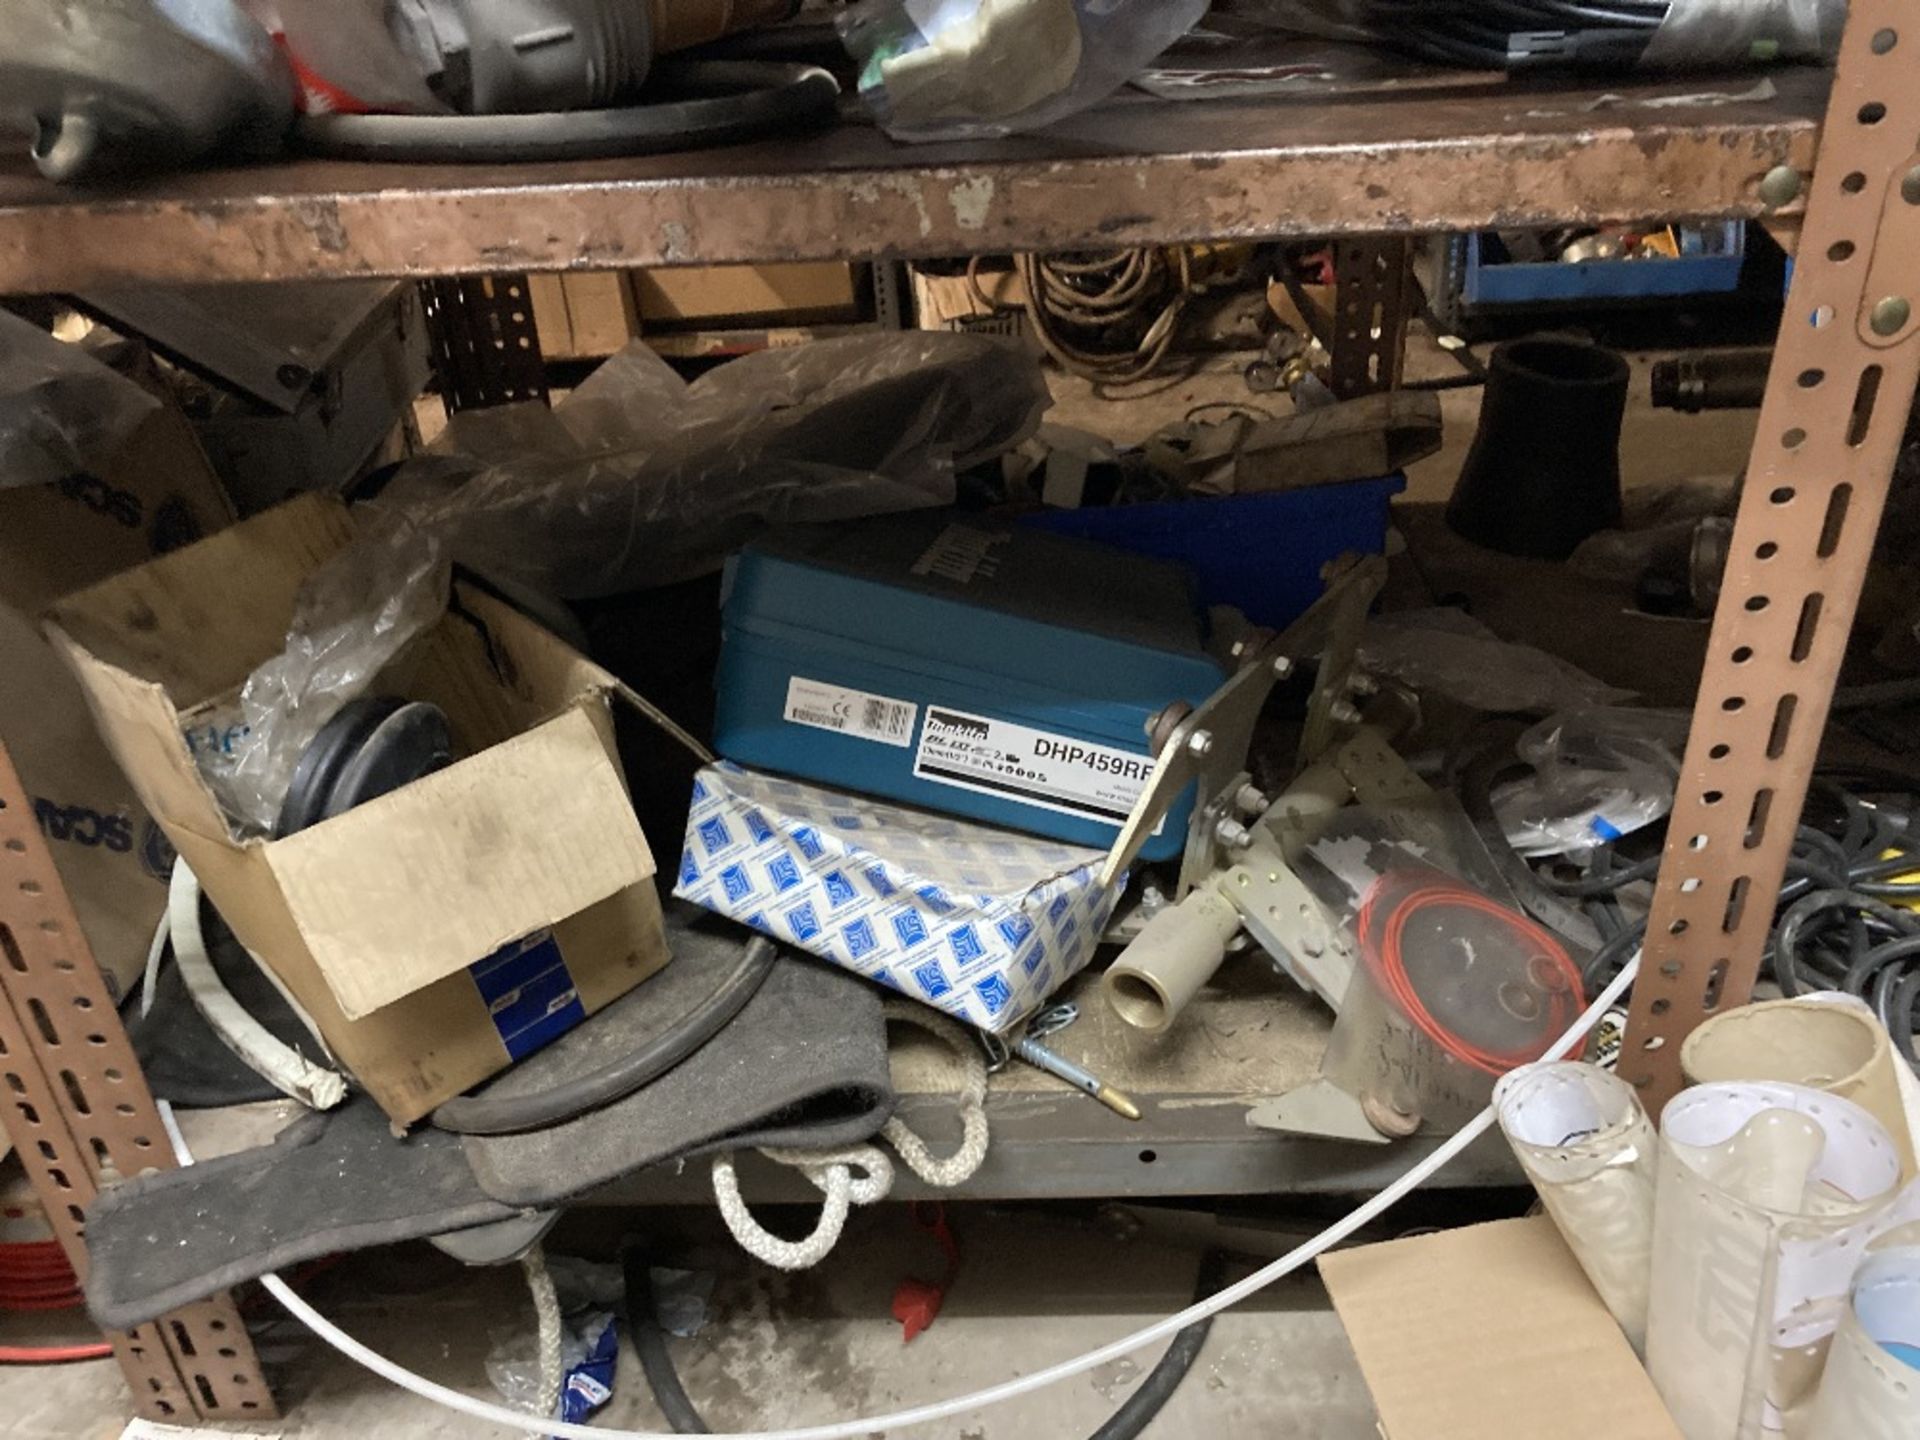 Content of Parts Room Containing Large Quantity of Various Parts & Components - Image 135 of 150